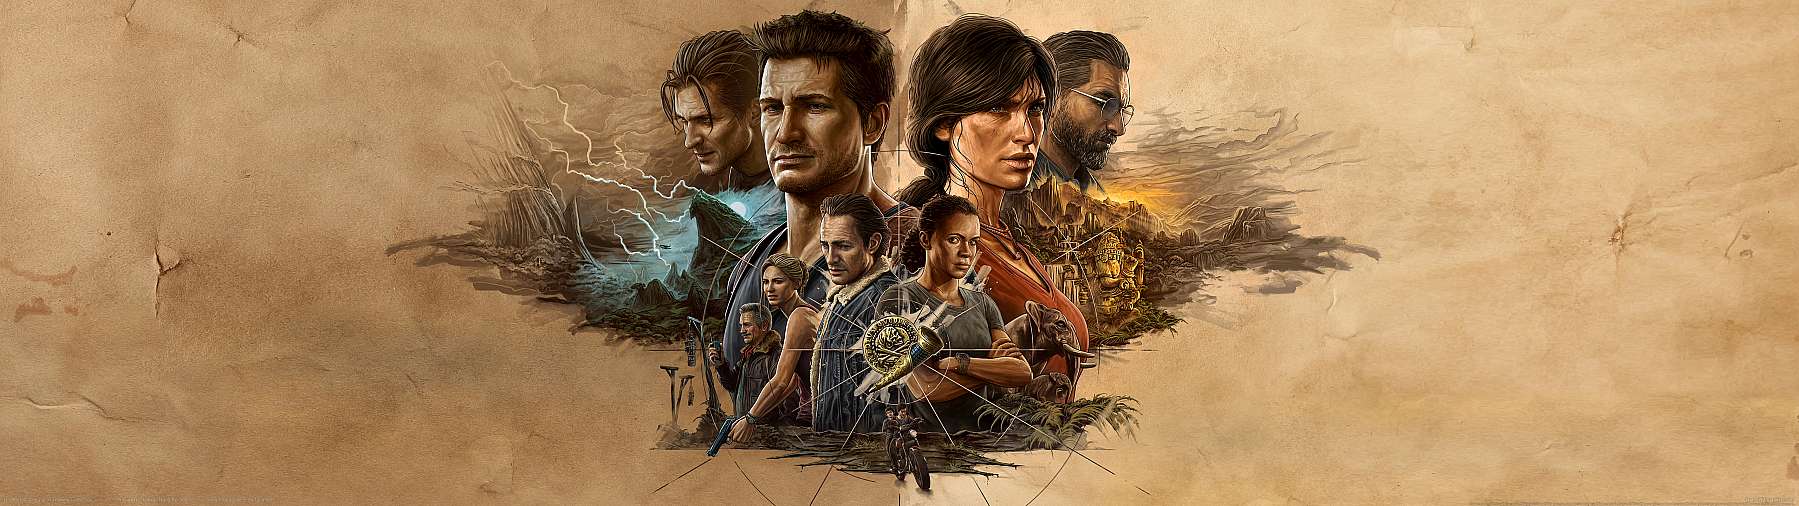 Uncharted: Legacy of Thieves Collection fond d'cran